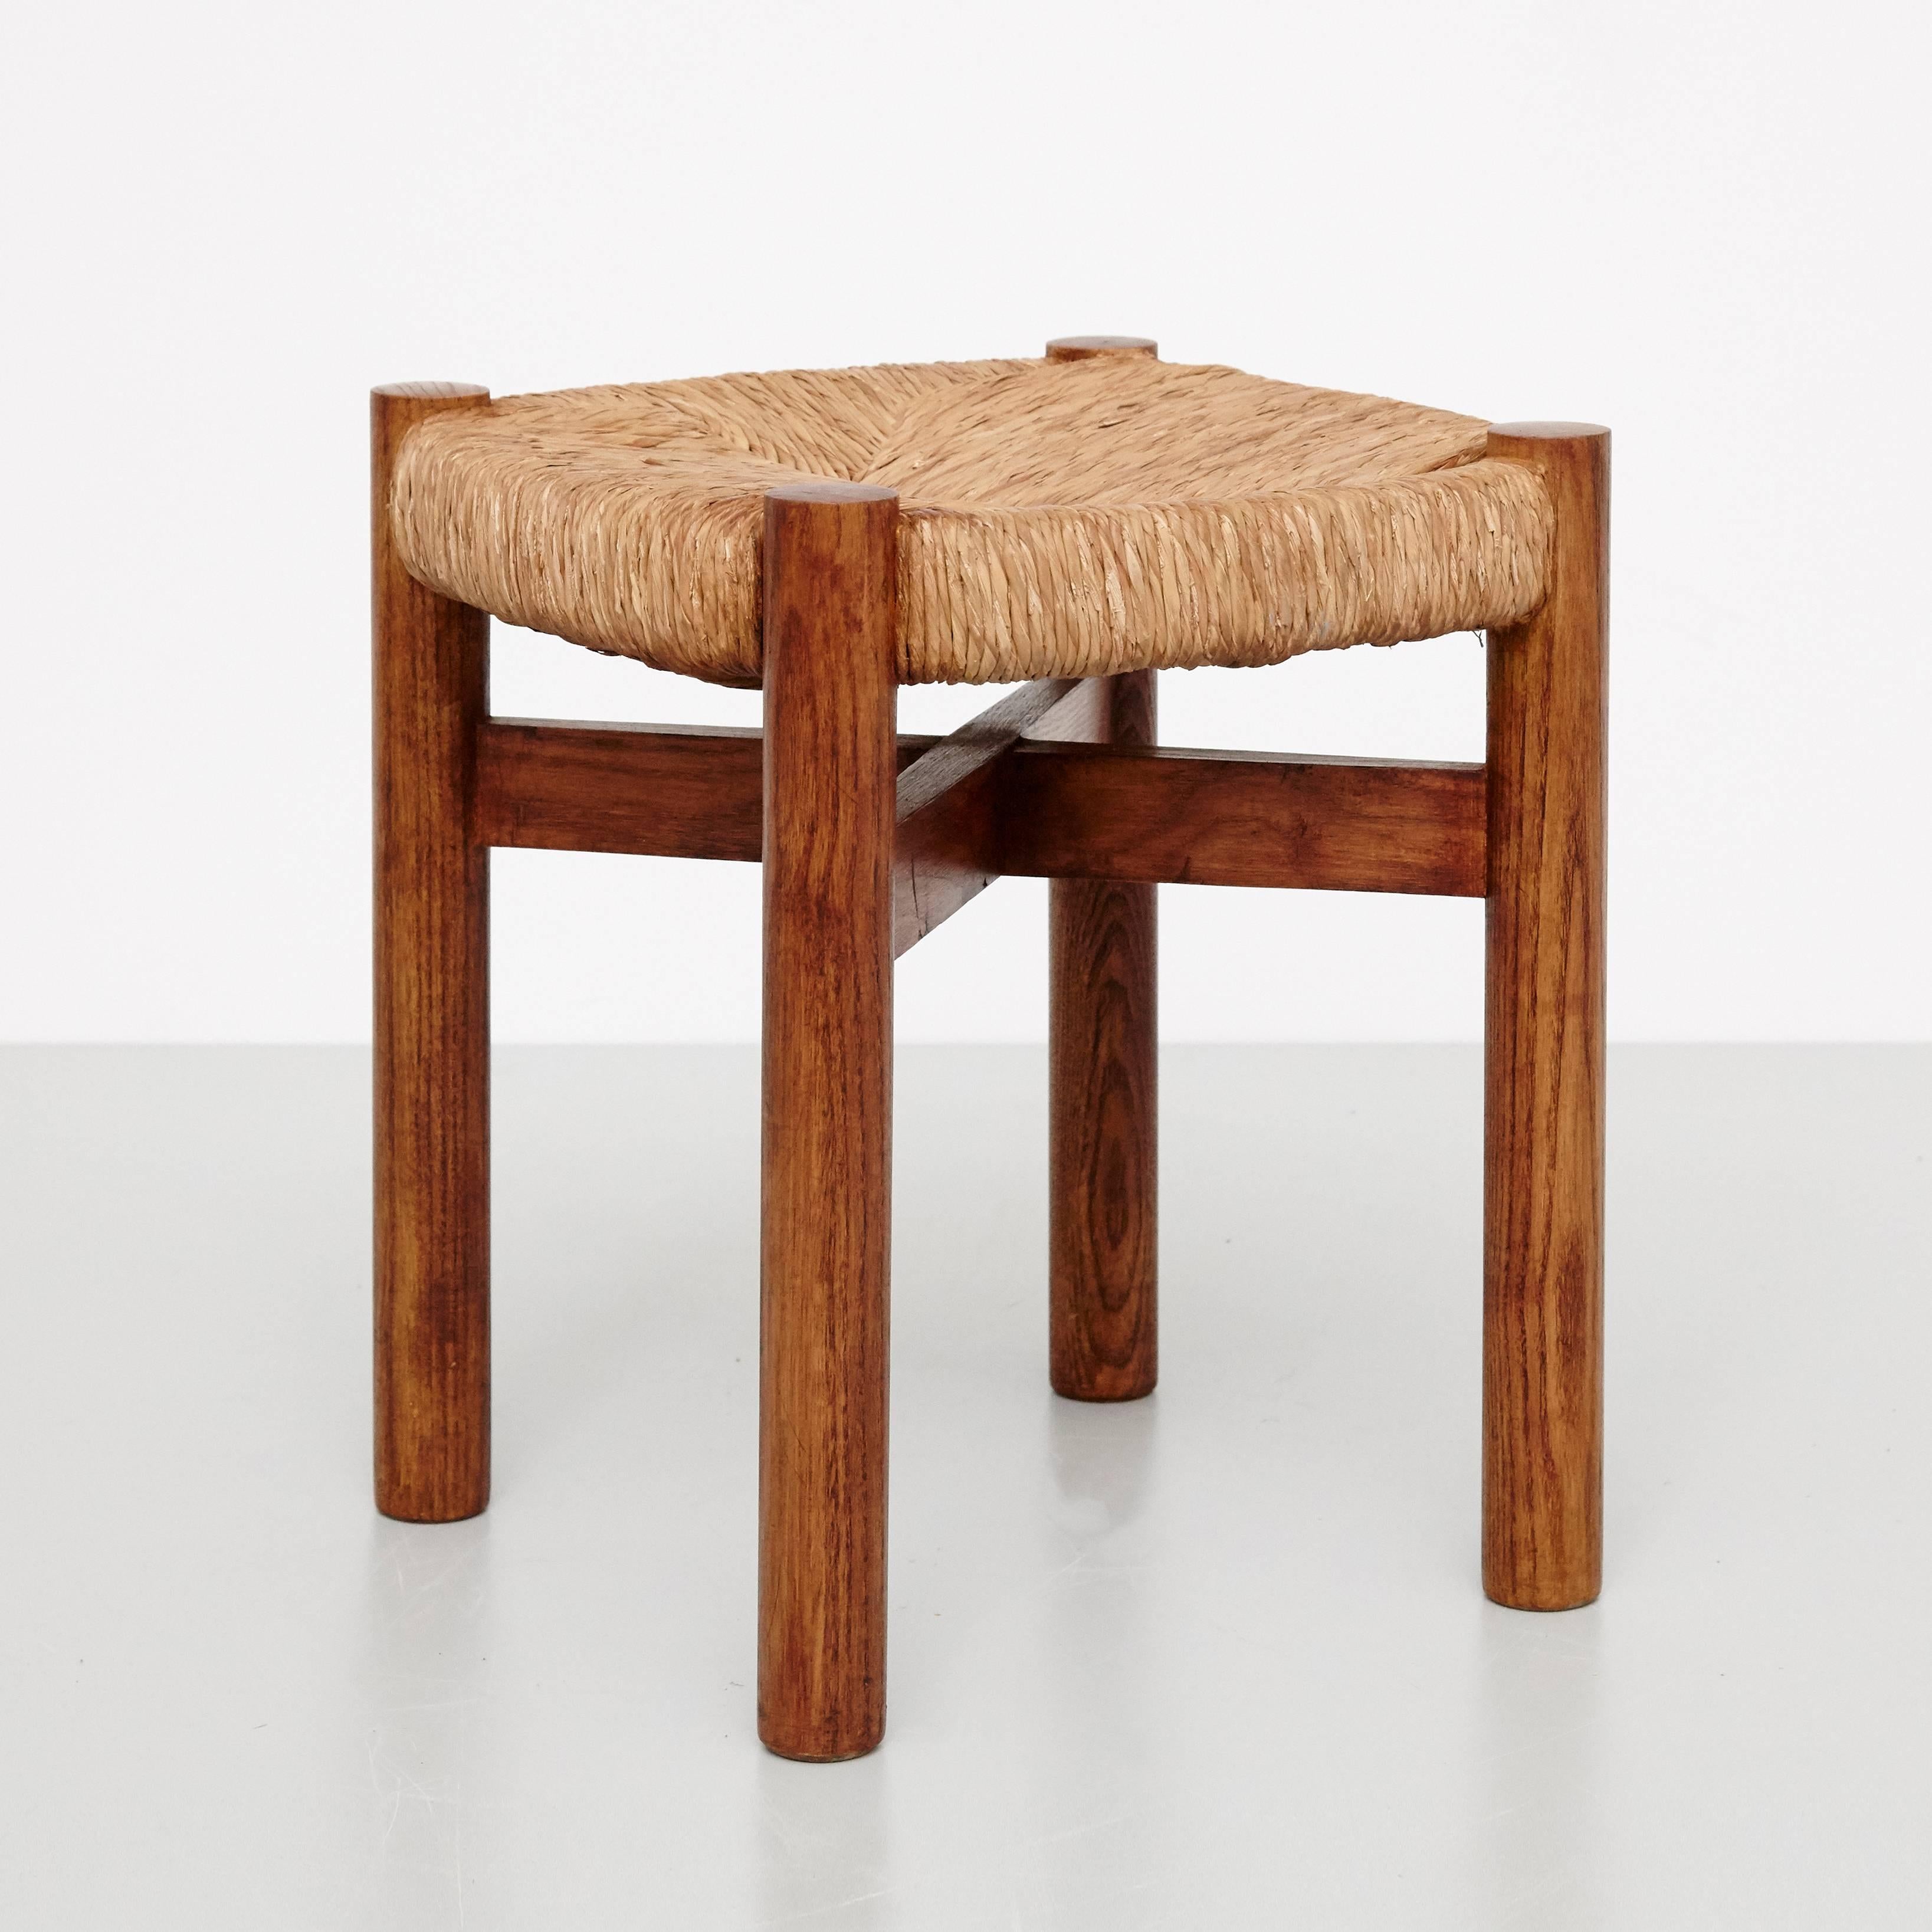 Stool, model meribel, designed by Charlotte Perriand, circa 1950.
Manufactured in France.
Wood and rattan. 

In good original condition, with minor wear consistent with age and use, preserving a beautiful patina.

Charlotte Perriand